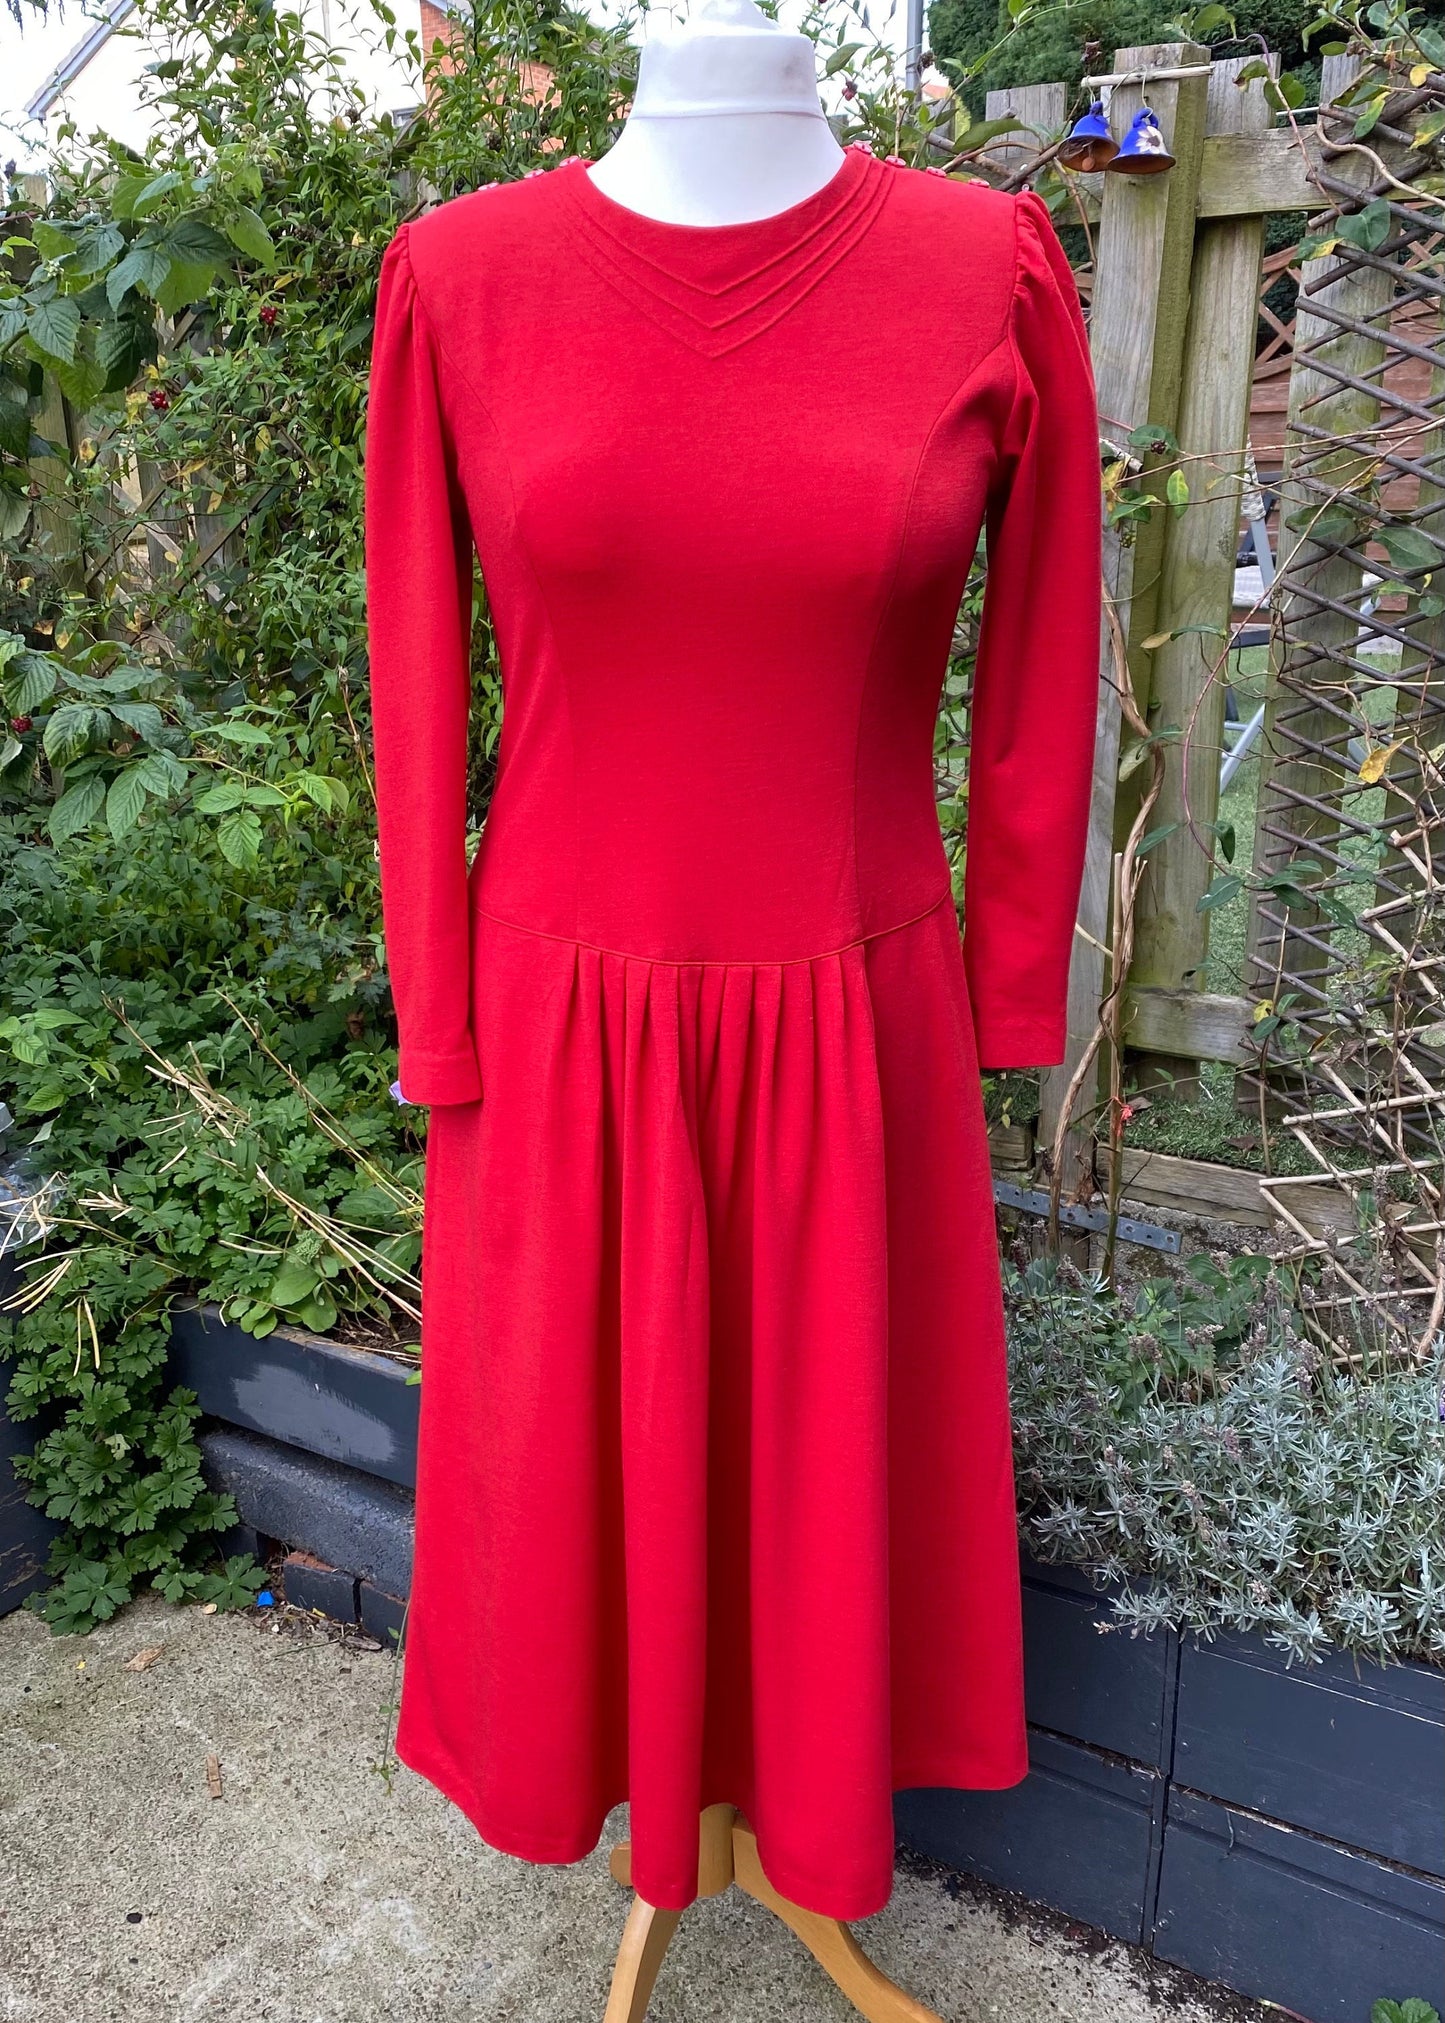 80s red long sleeved midi dress by Lanz Originals . Approx UK size 12 -14